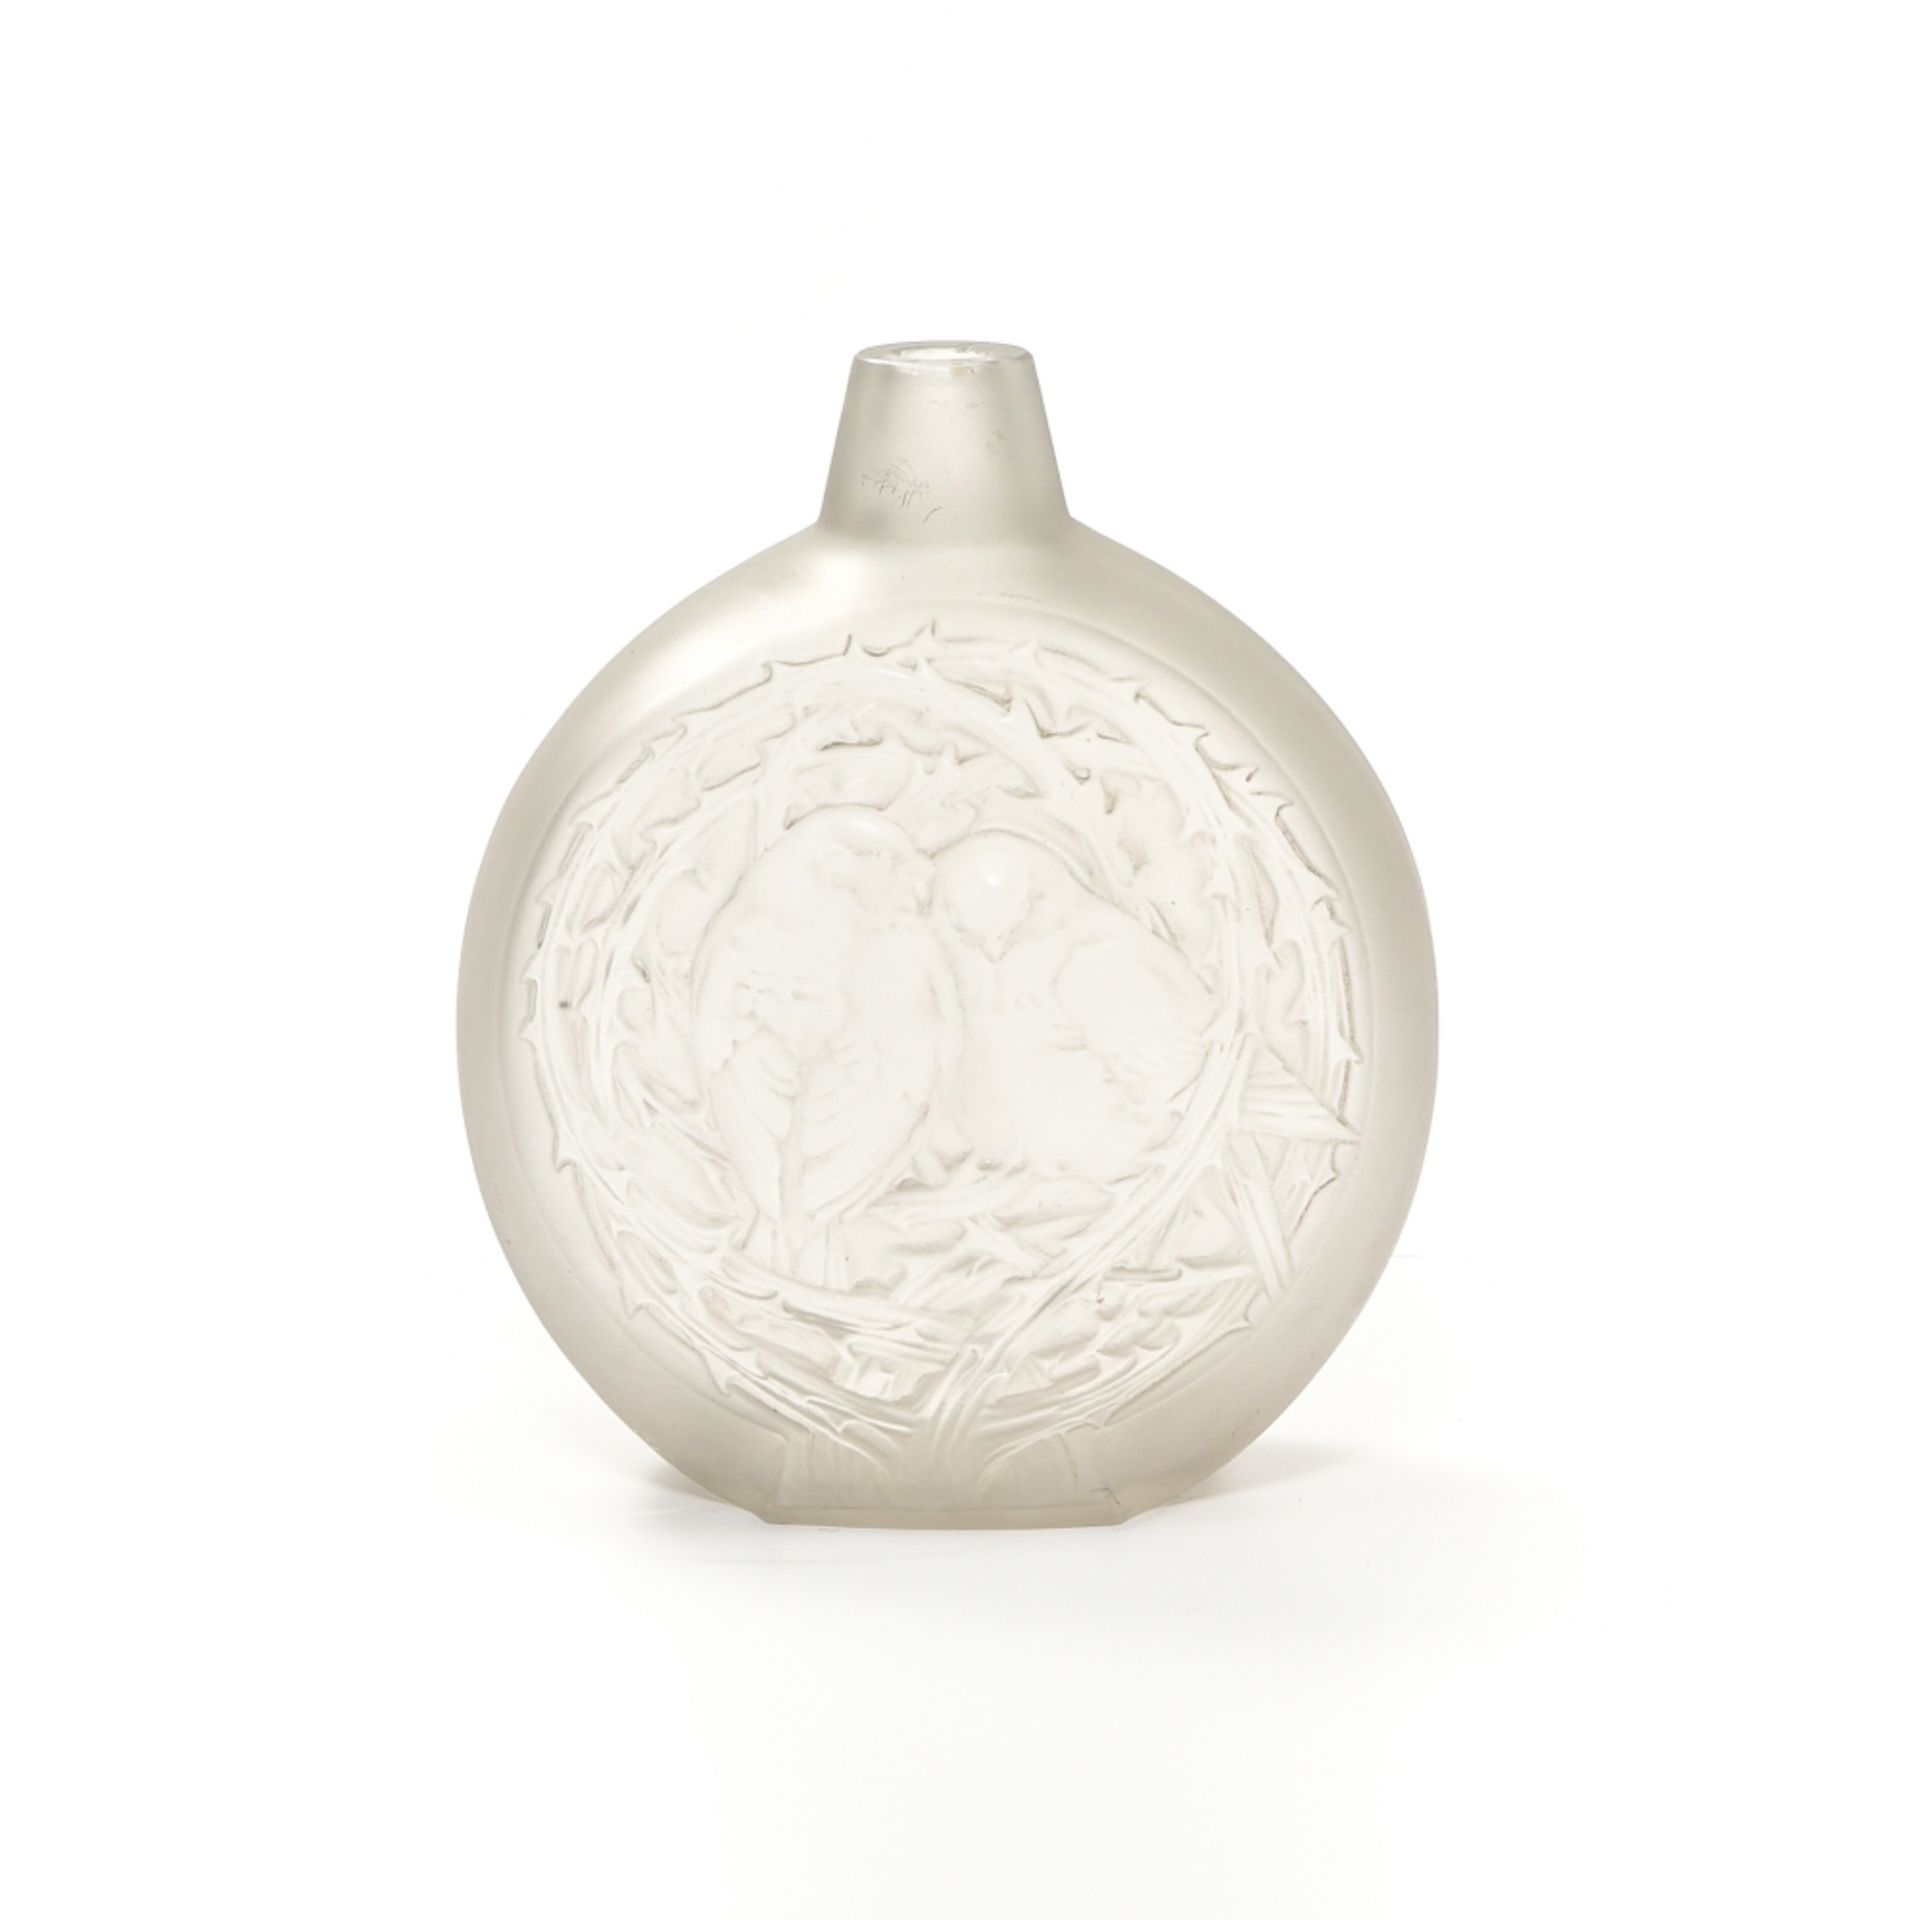 LALIQUE "Two sparrows chatting" vase, model drawn in 1920, last made in 1947. Moulded pressed